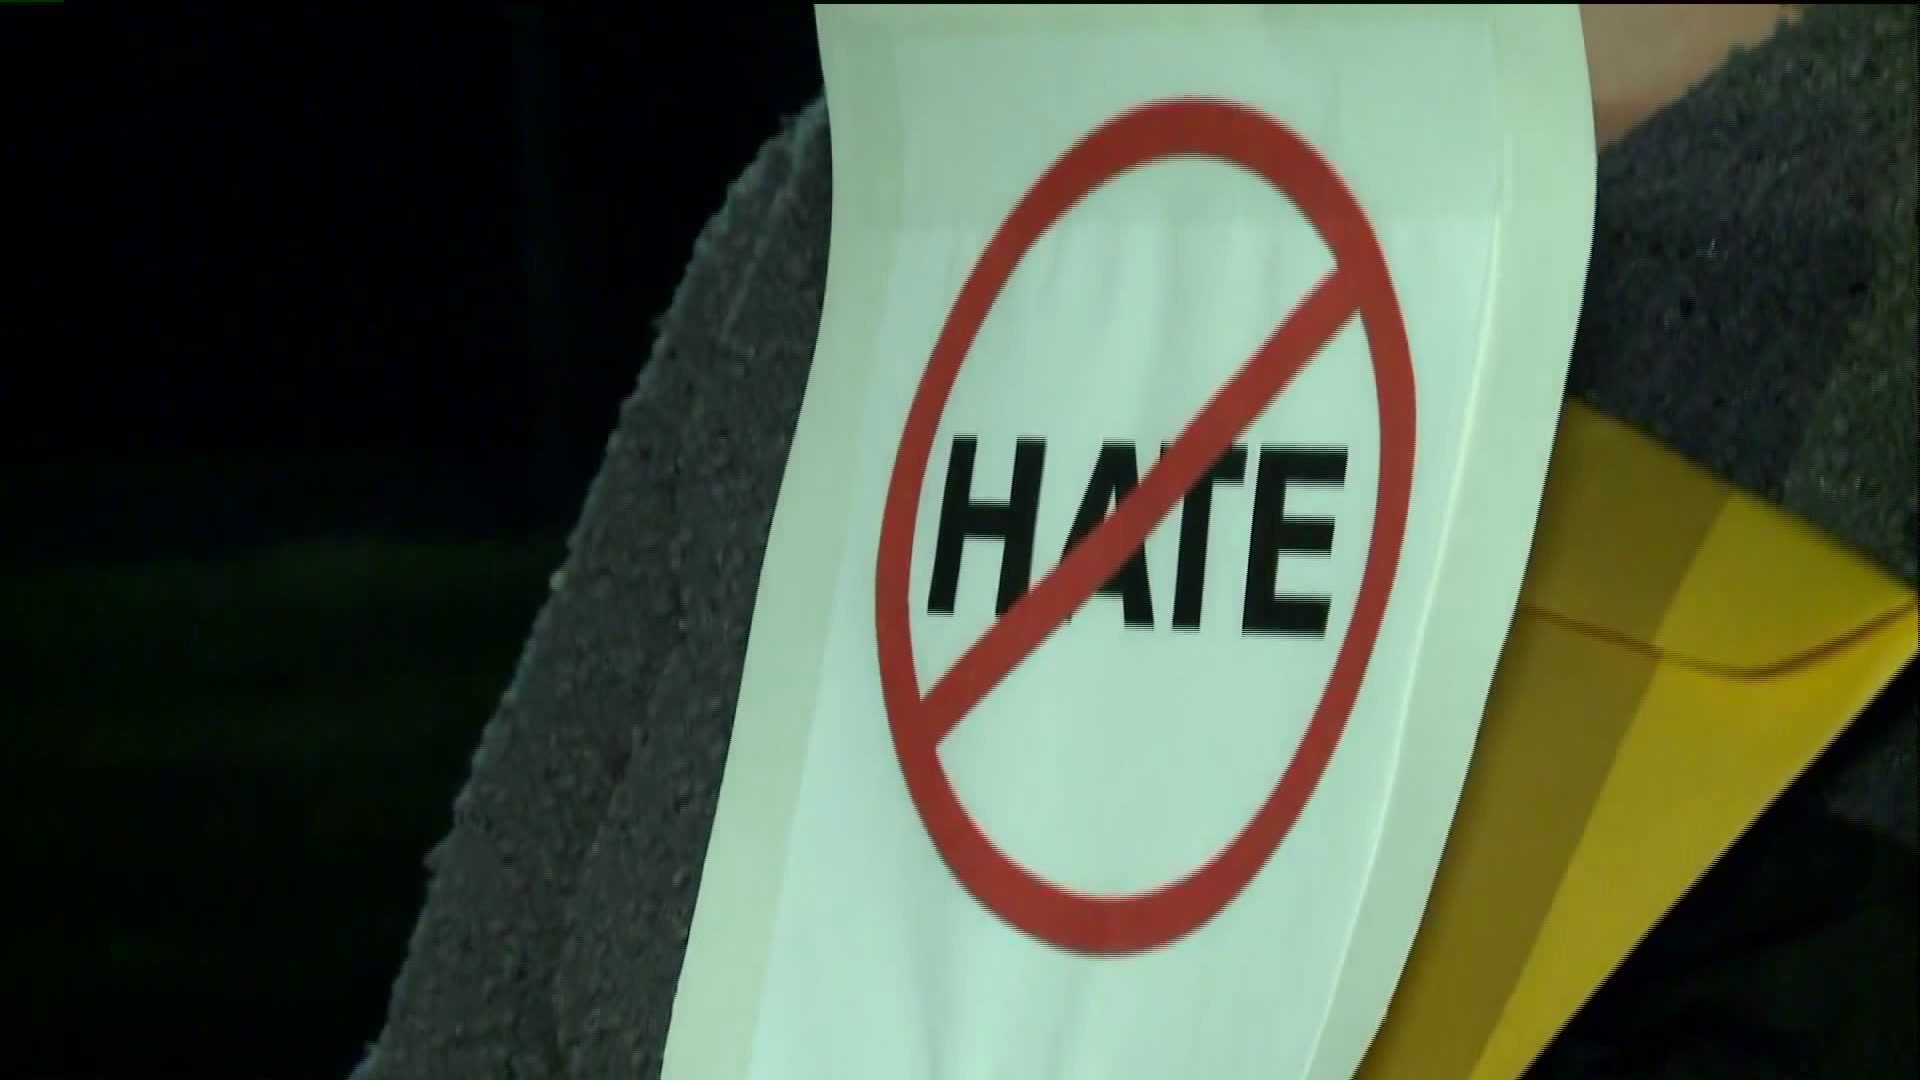 Granby meeting held to discuss racial slur on school sign